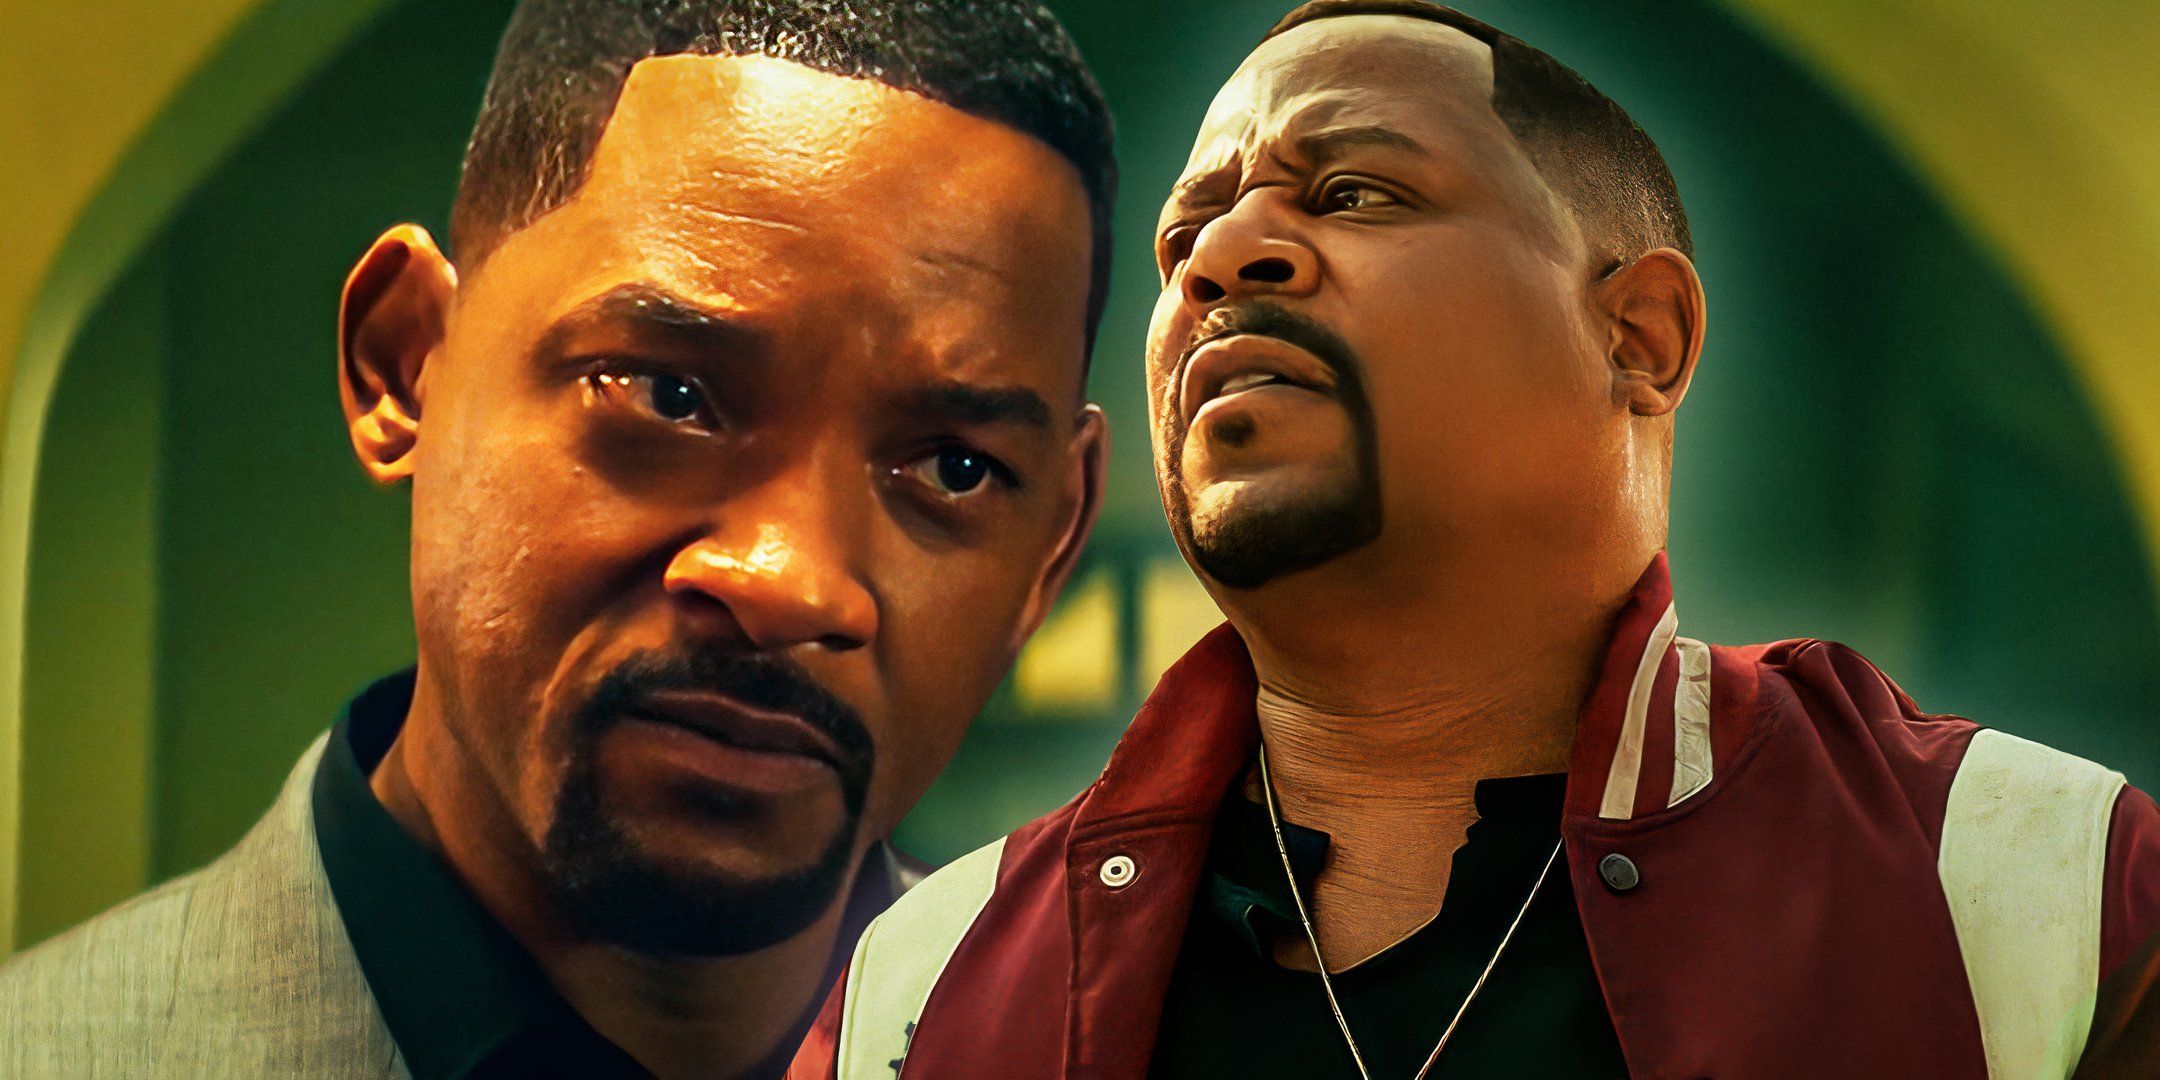 Will Smith and Martin Lawrence from the Bad Boys Movies